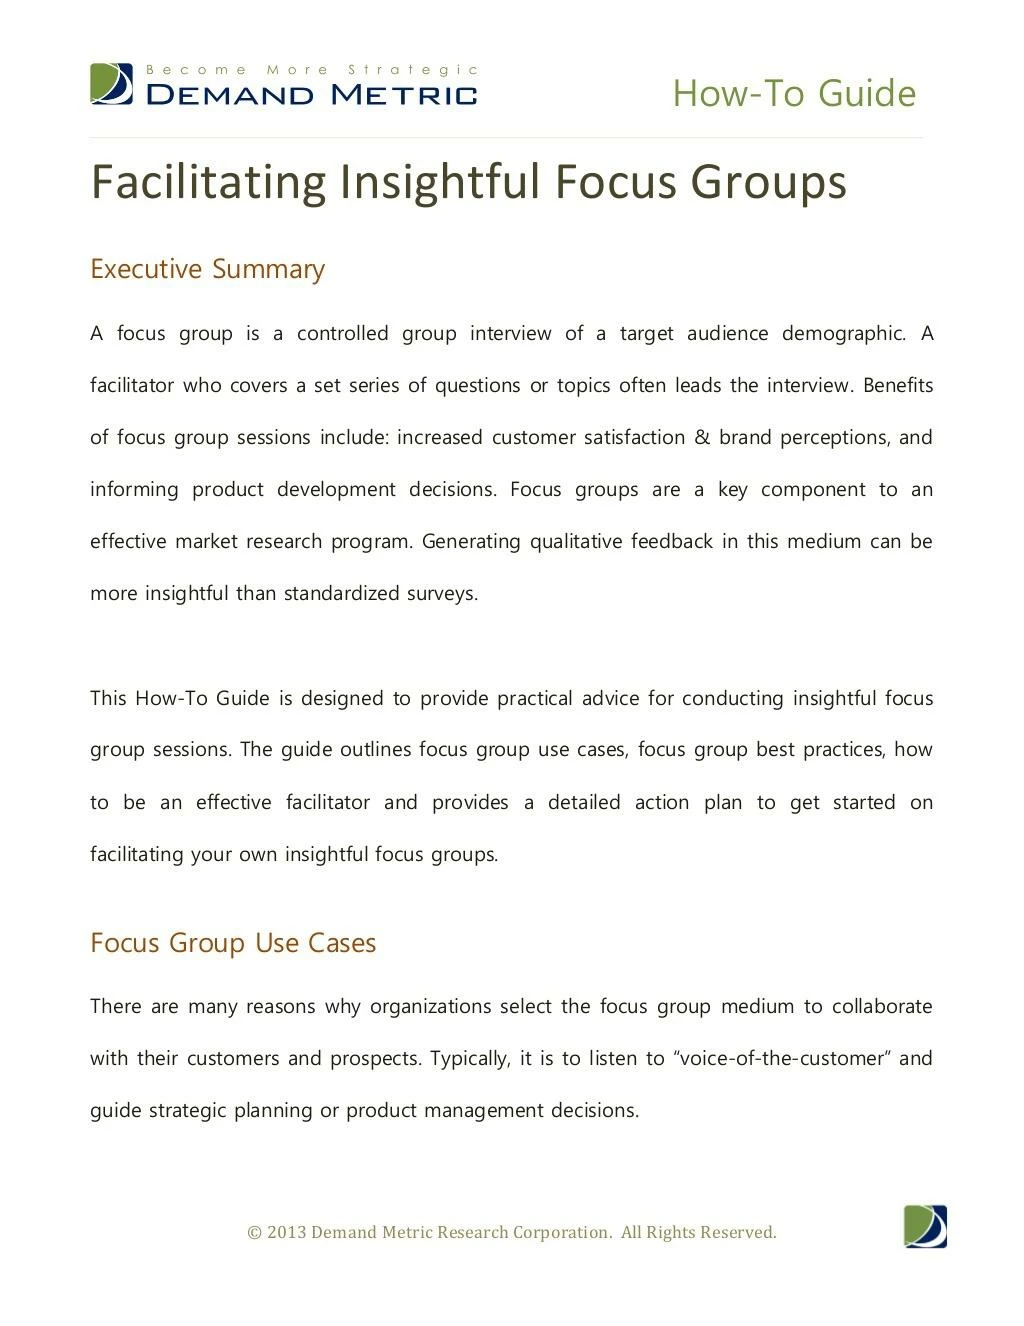 how to guide facilitating insightful focus groups